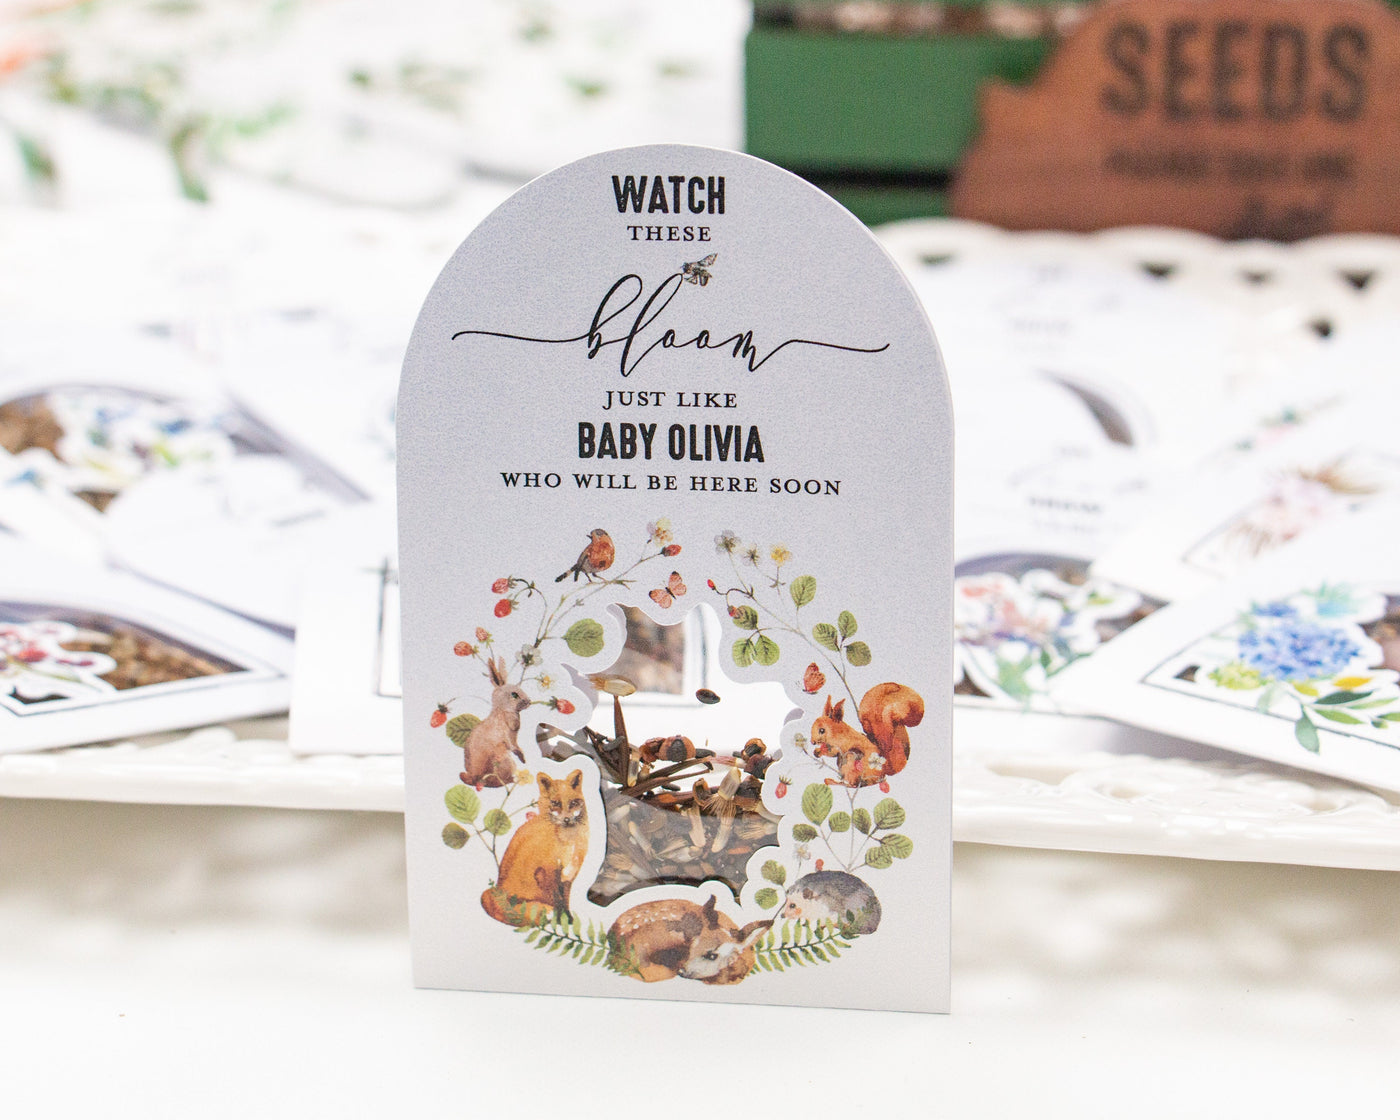 Baby in Bloom Wildflower Autumn Seed Packet Favors, Baby Shower Favor, With  Or Without Seeds